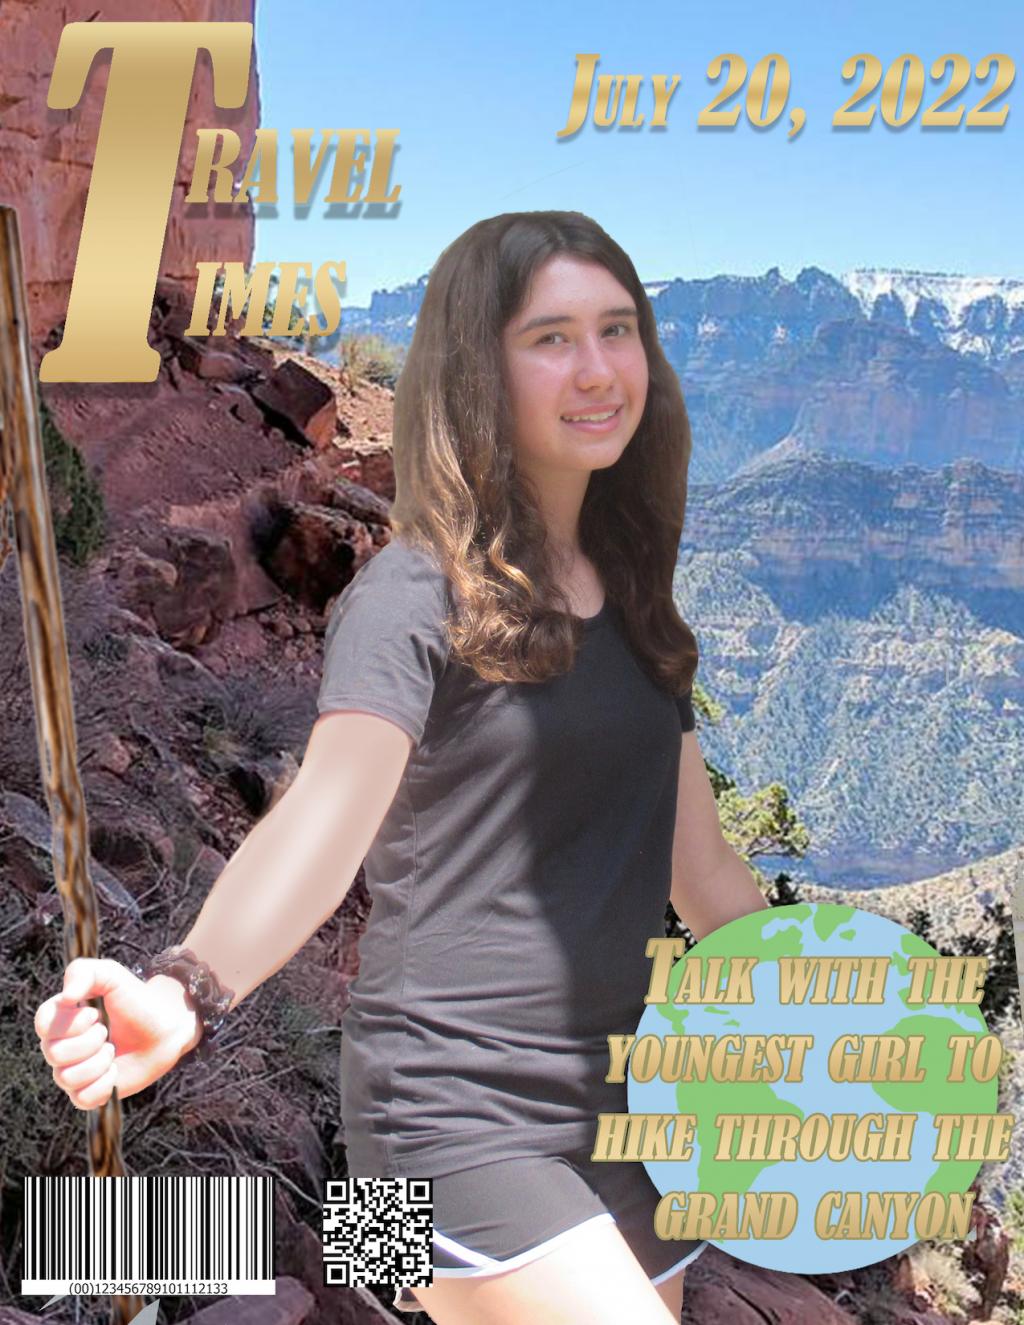 An example of student work: a magazine cover featuring the youngest girl ever to hike the grand canyon.